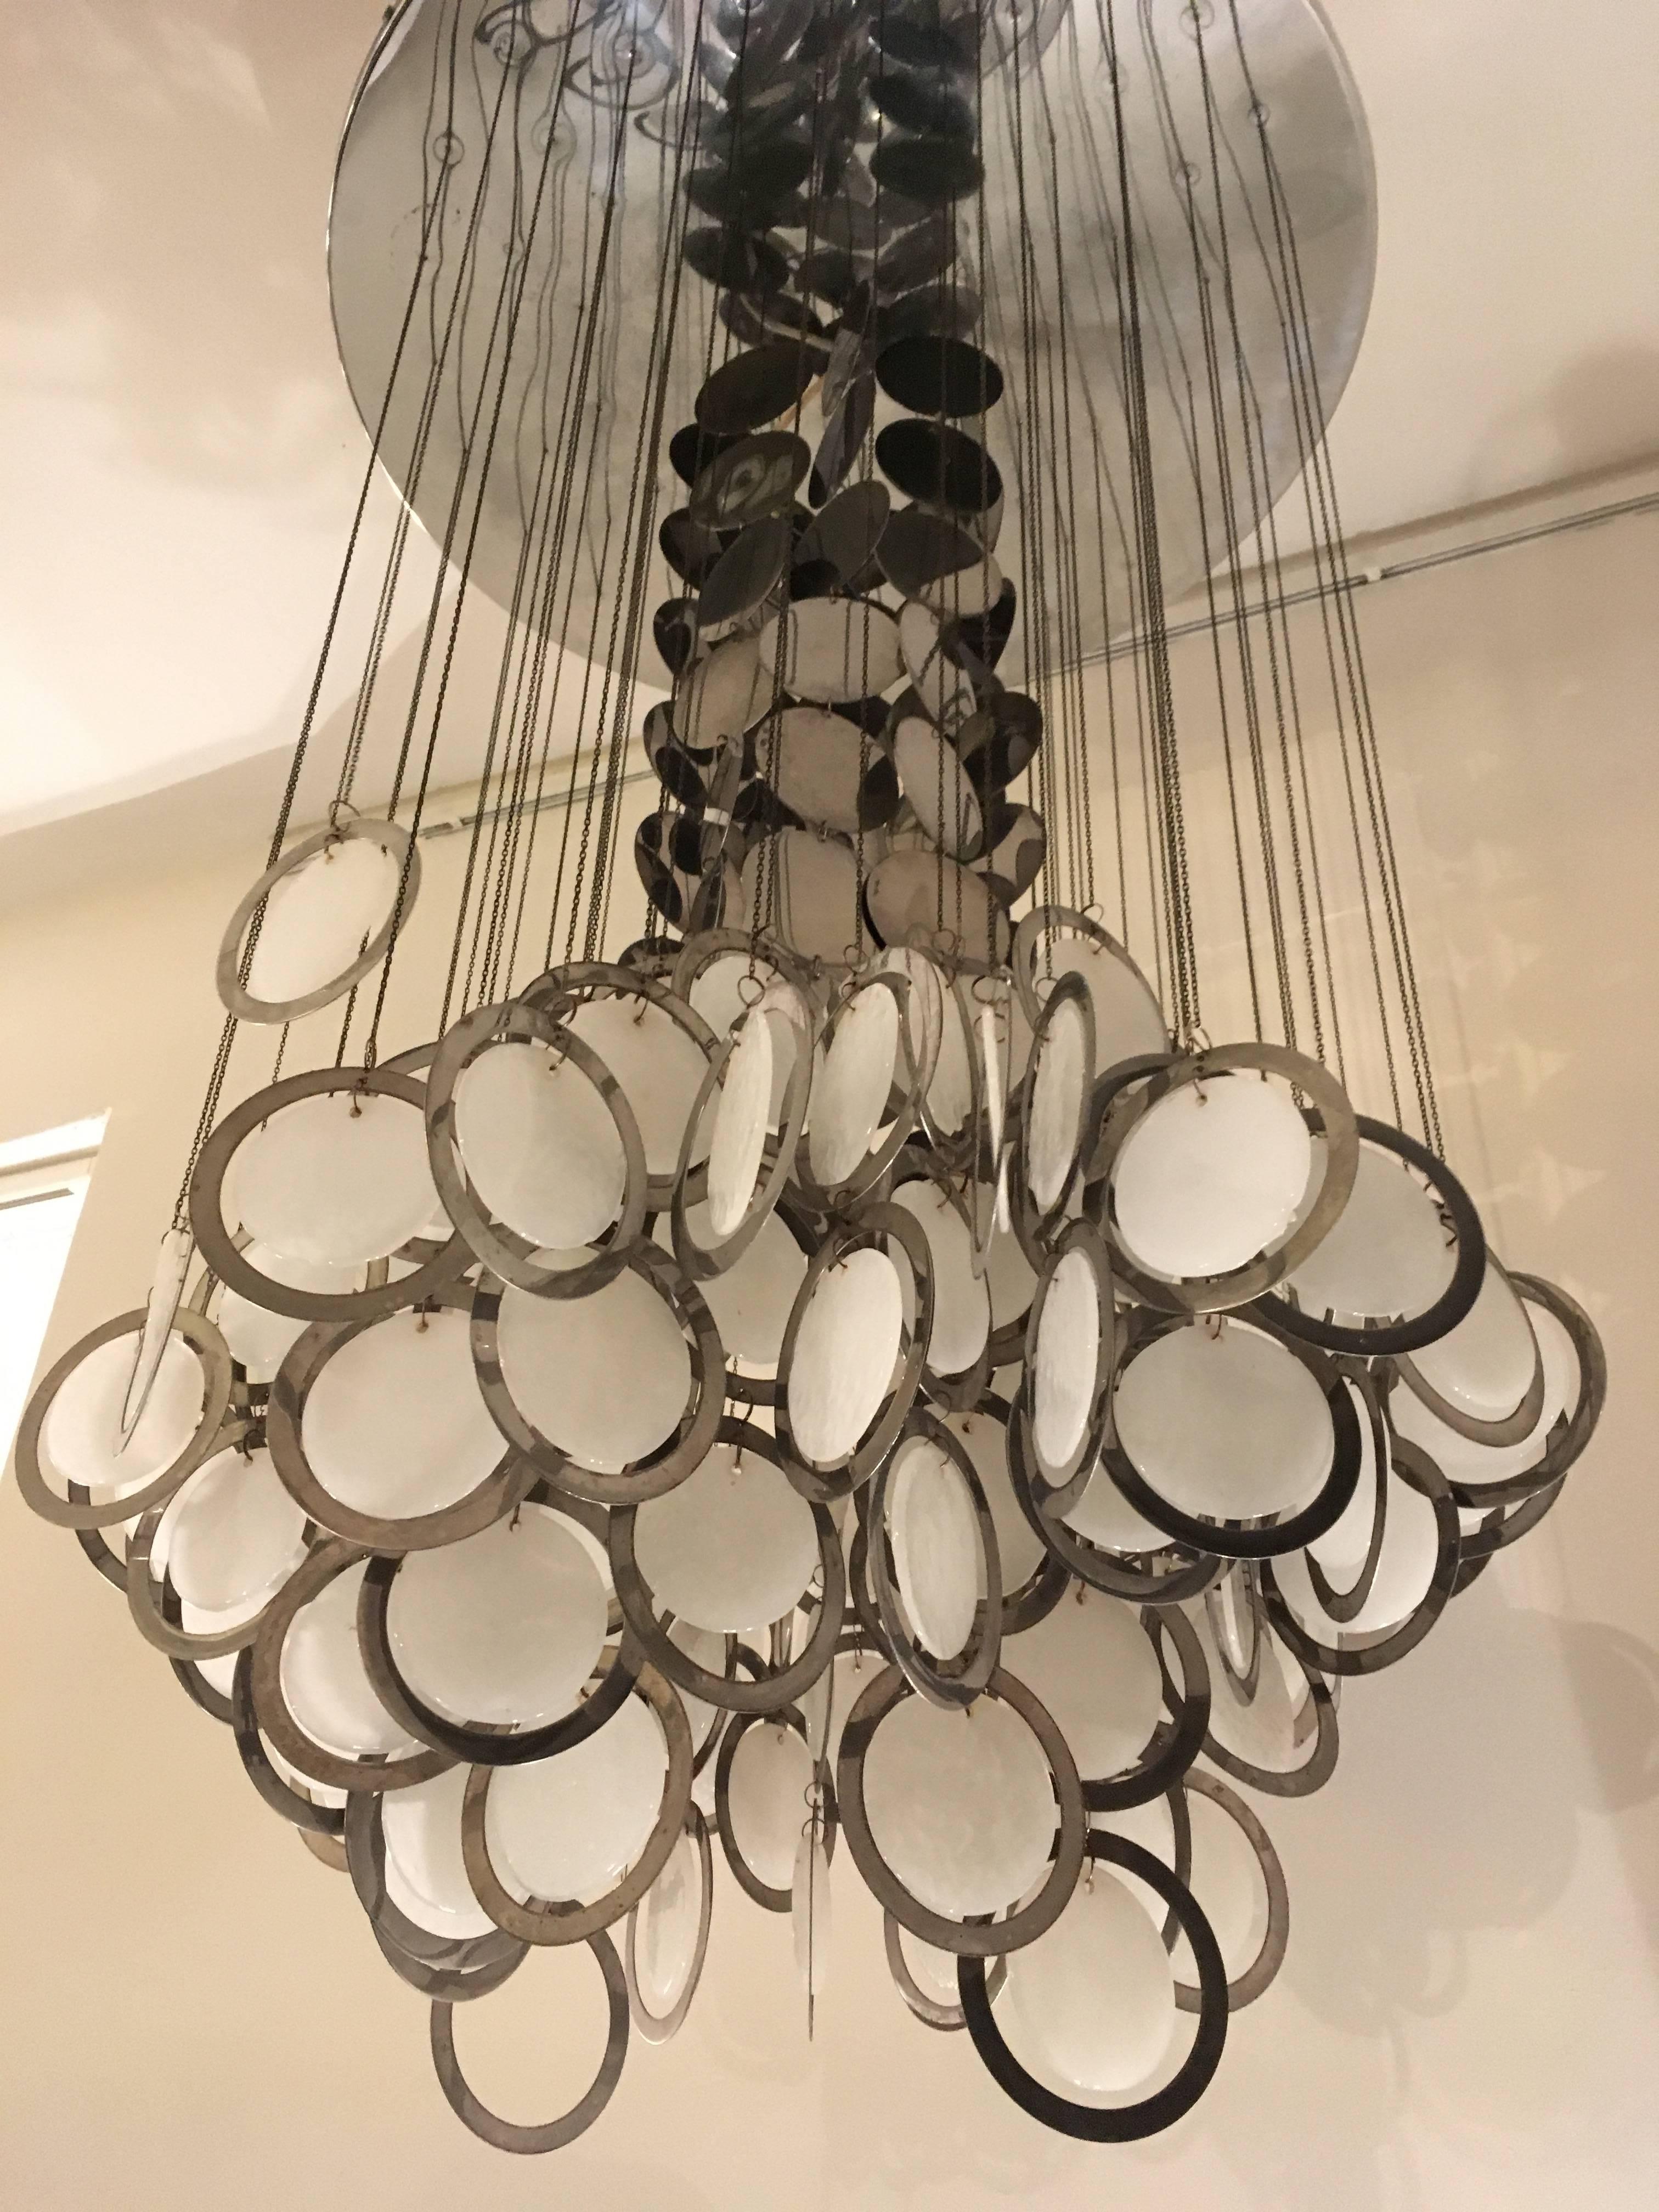 Mid-Century Modern Large Rare Vistosi Opal Glass and Chrome Discs Chandelier, Murano, Italy, 1960s